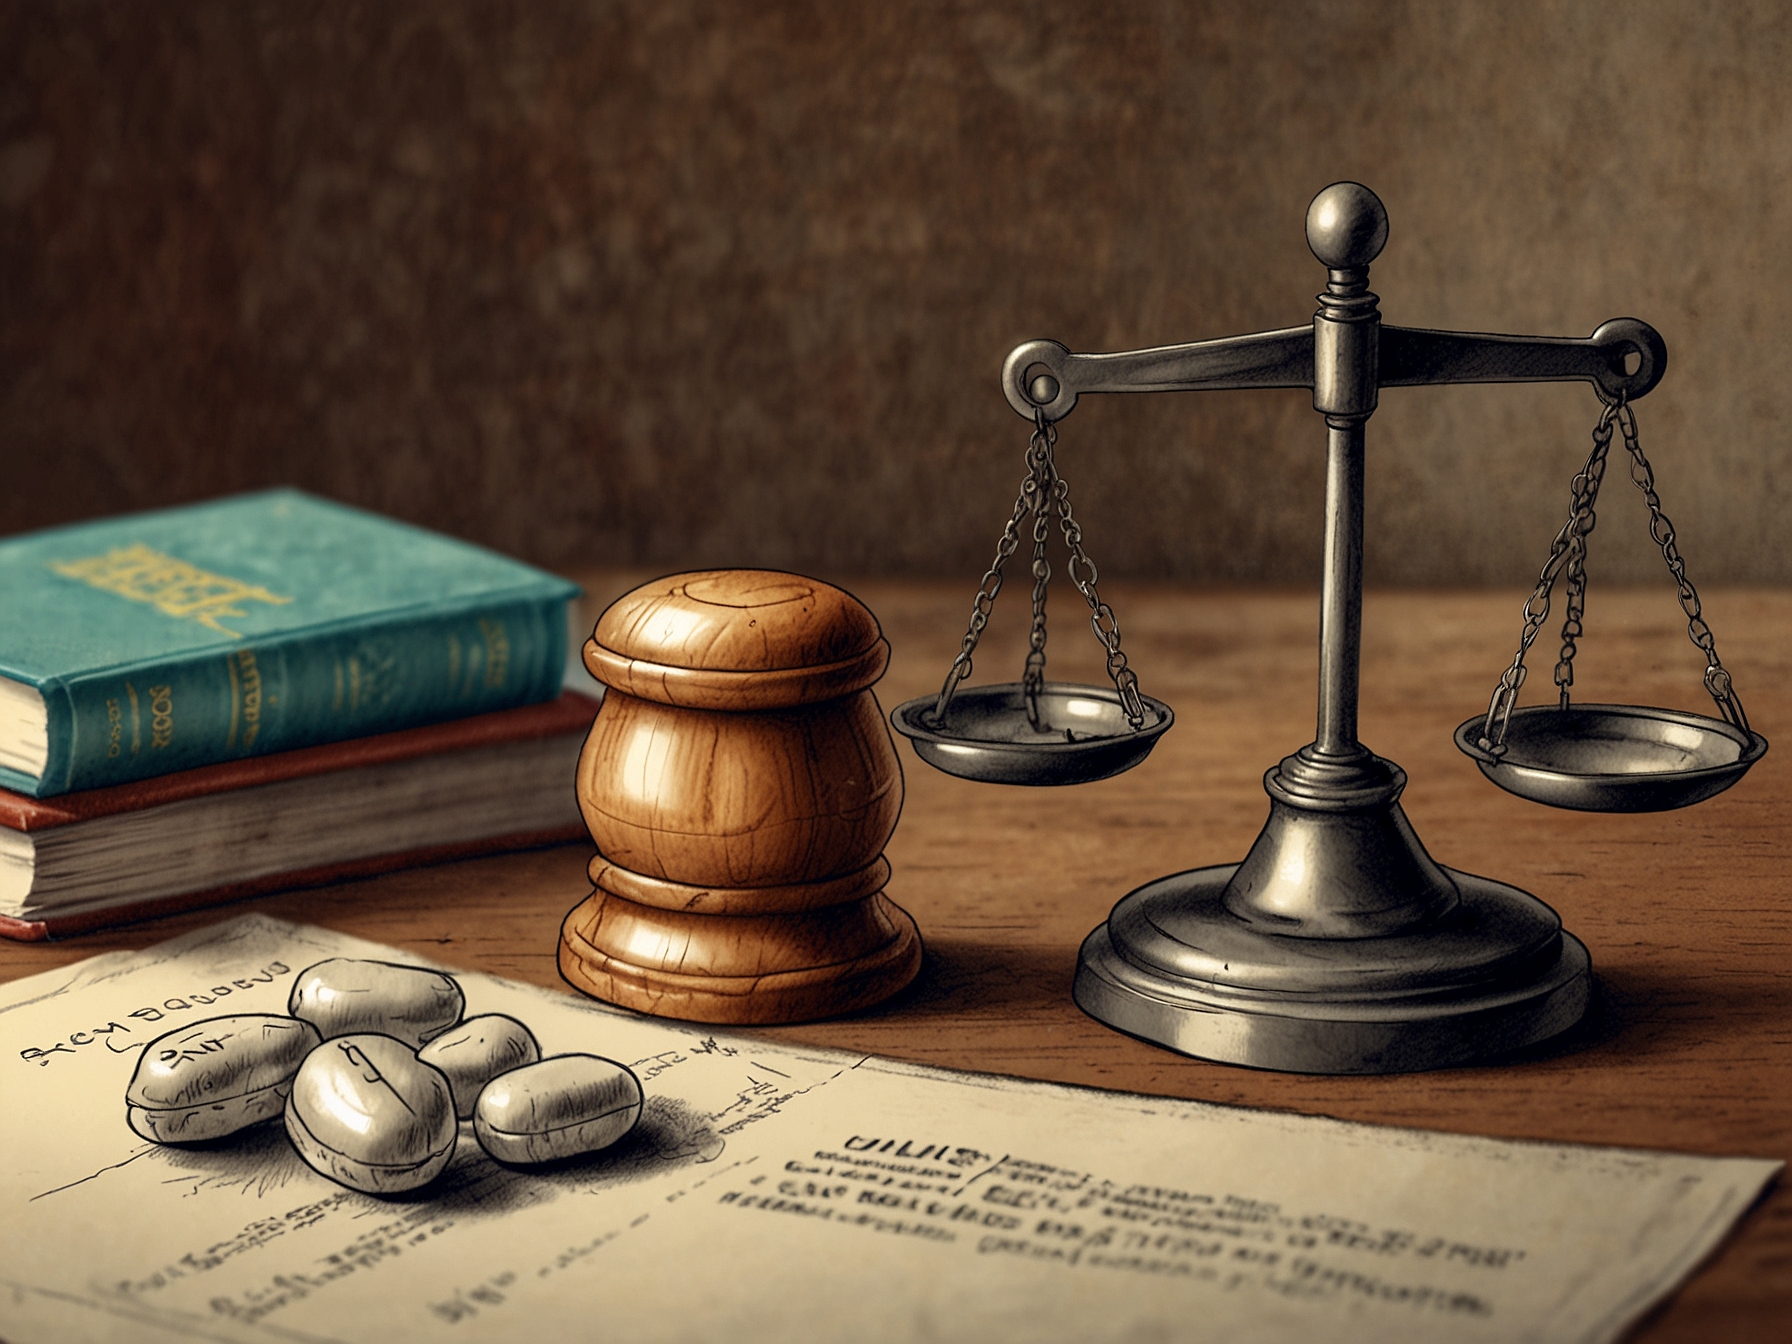 A graphic showing mifepristone pills alongside scales of justice, representing the legal complexities and ongoing debates around medication abortion.